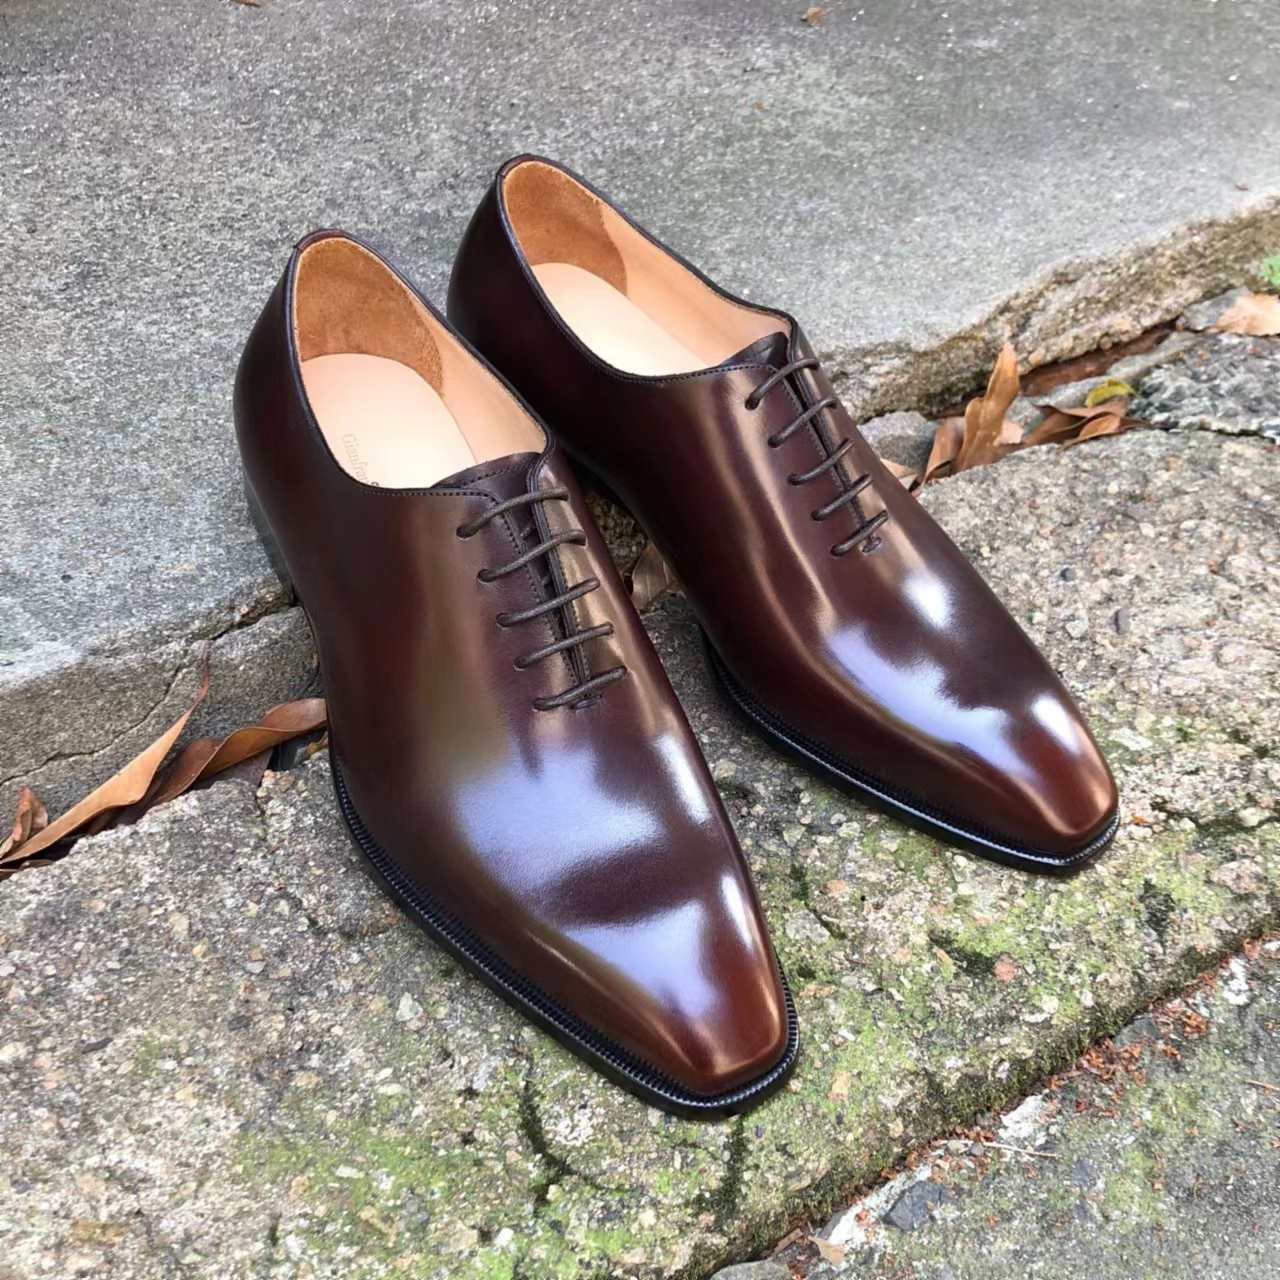 Classic coffee/black men's one-leather oxford shoes